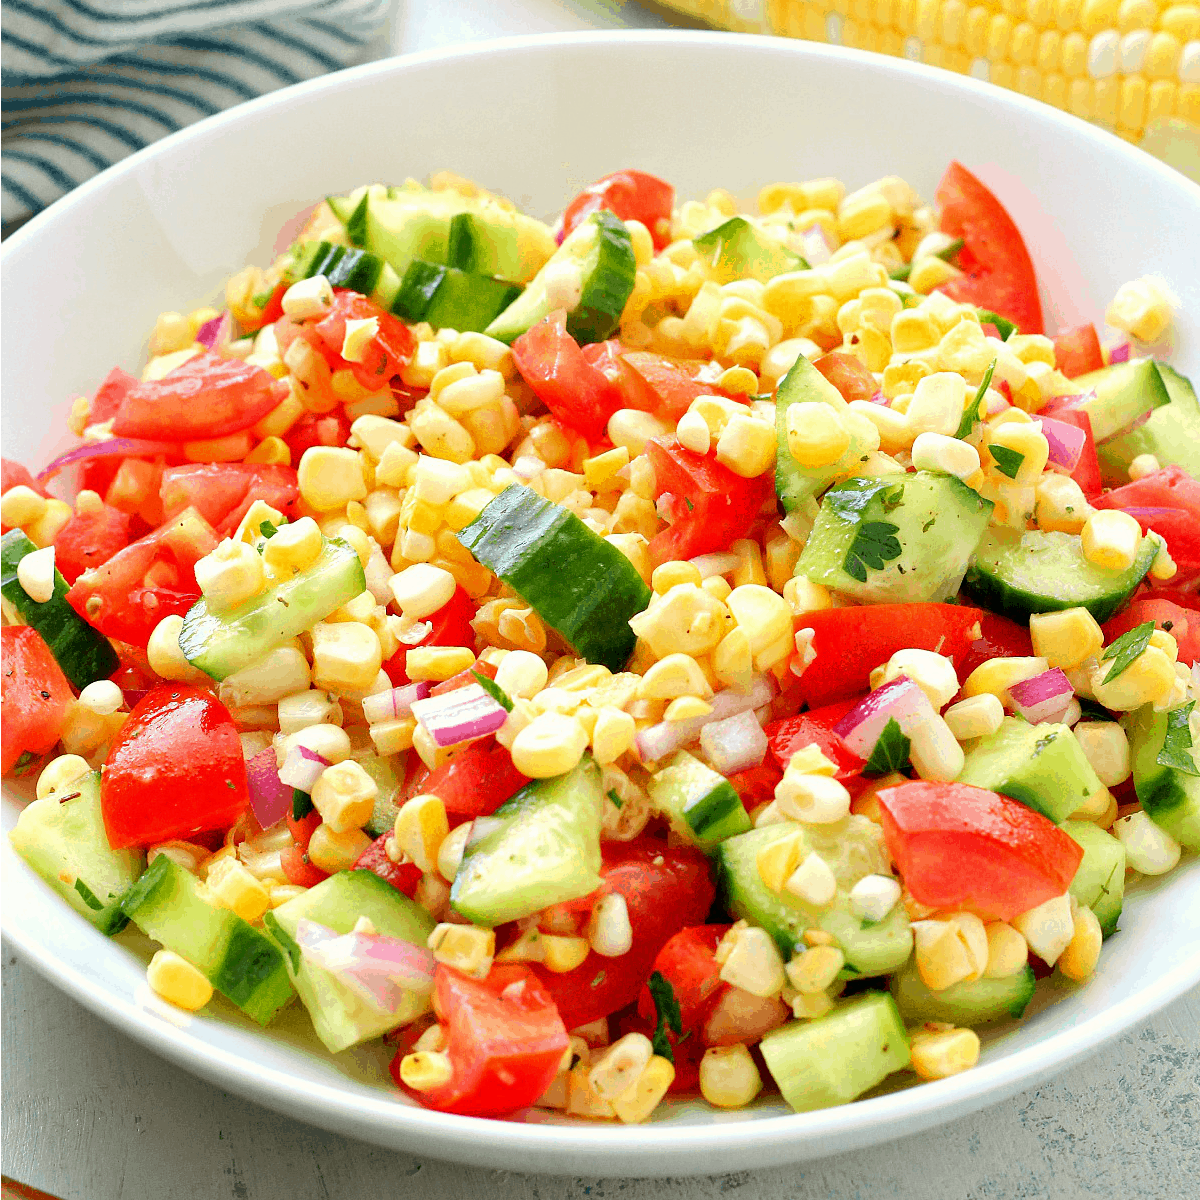 Corn salad with tomatoes and cucumber.